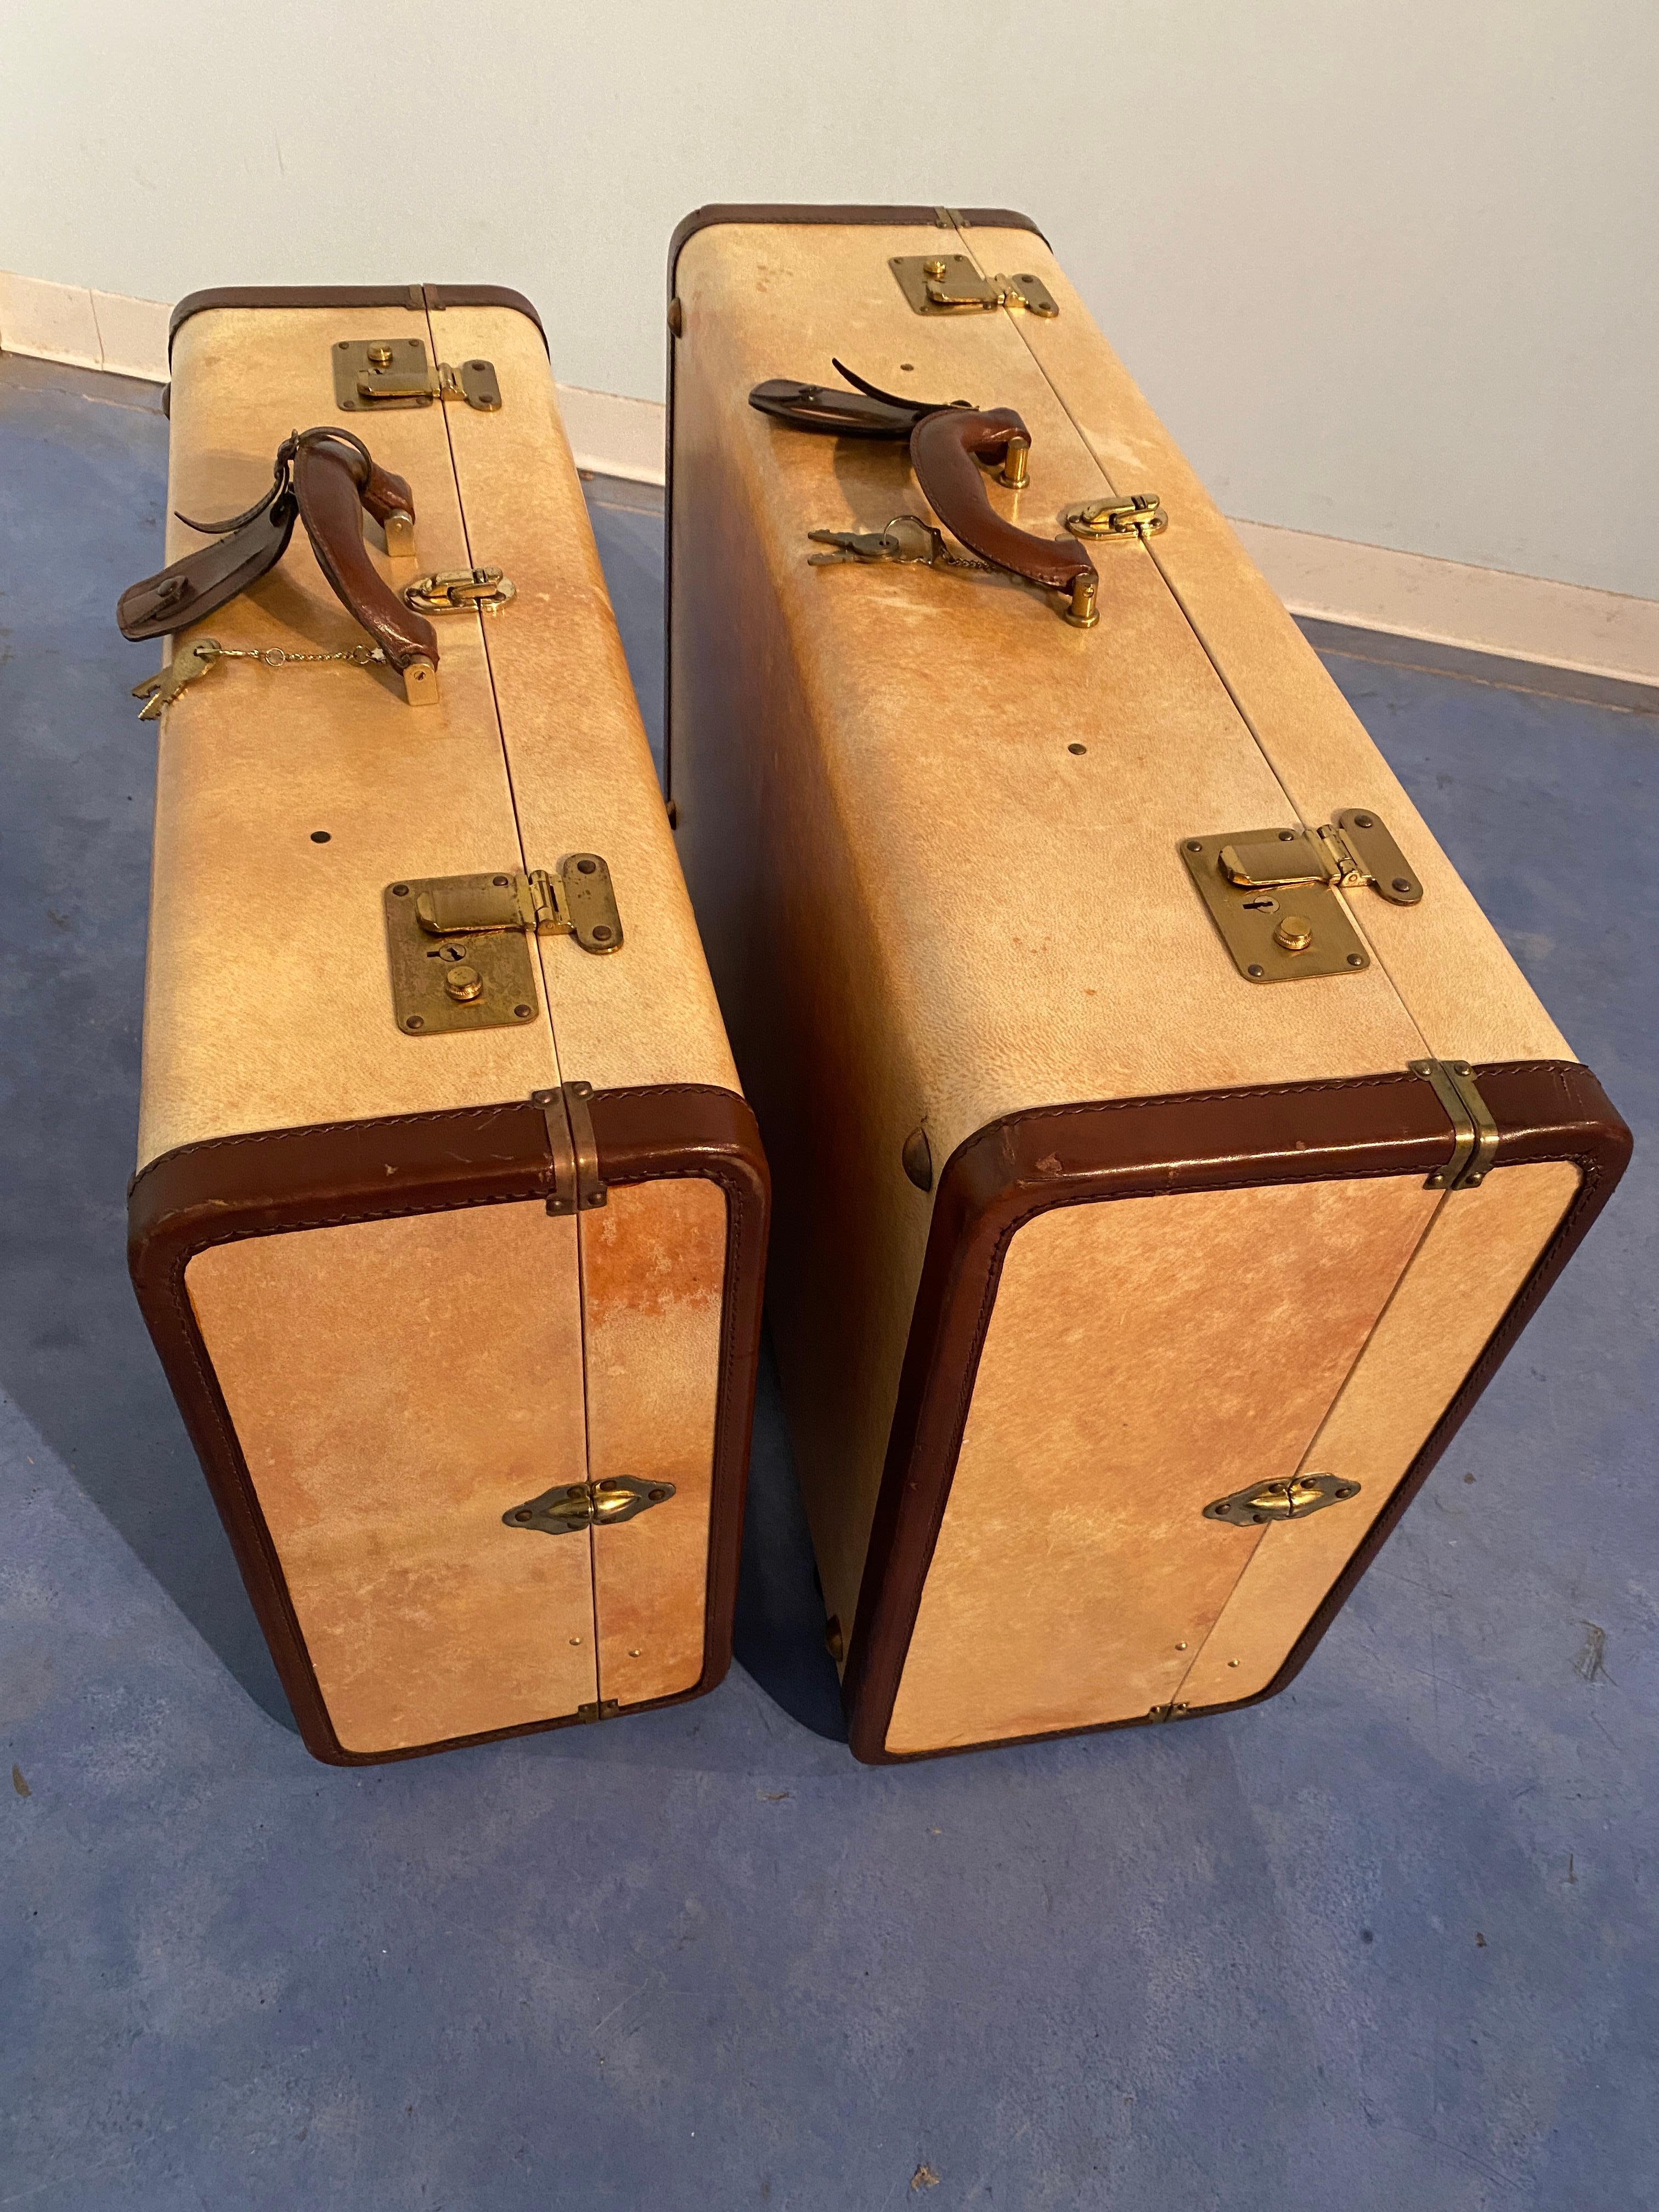 Italian Mid-Century Modern Parchment Paper Luggages or Suitcases Set of Two 1960 For Sale 9